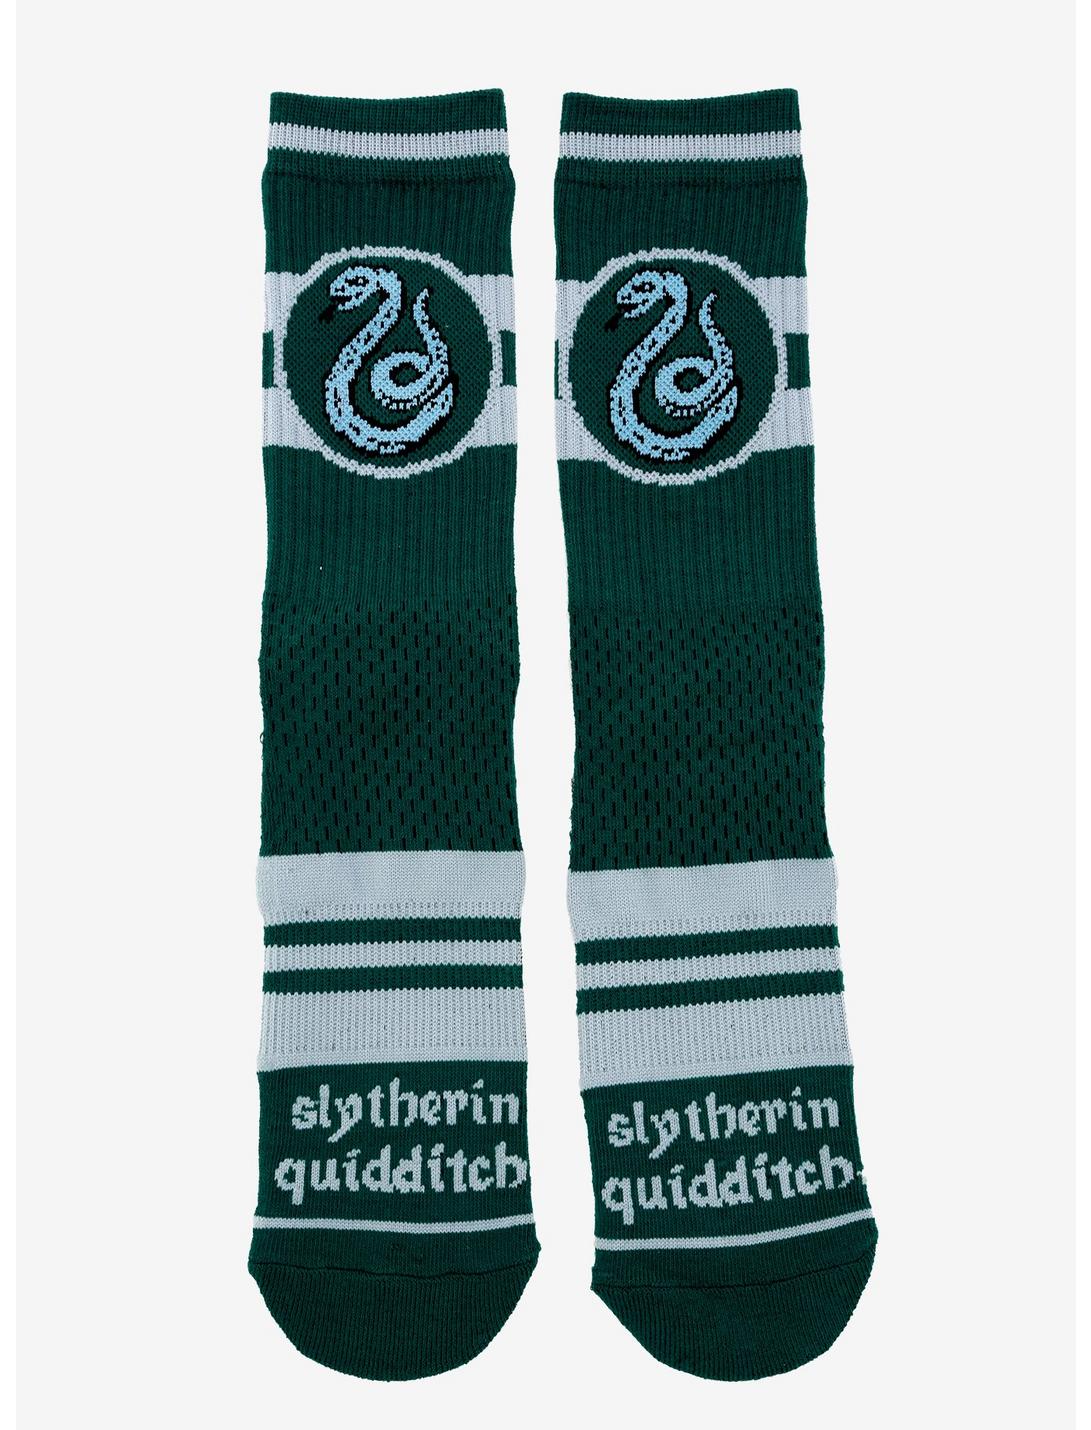 Harry Potter Slytherin Quidditch Crew Socks - BoxLunch Exclusive, , hi-res